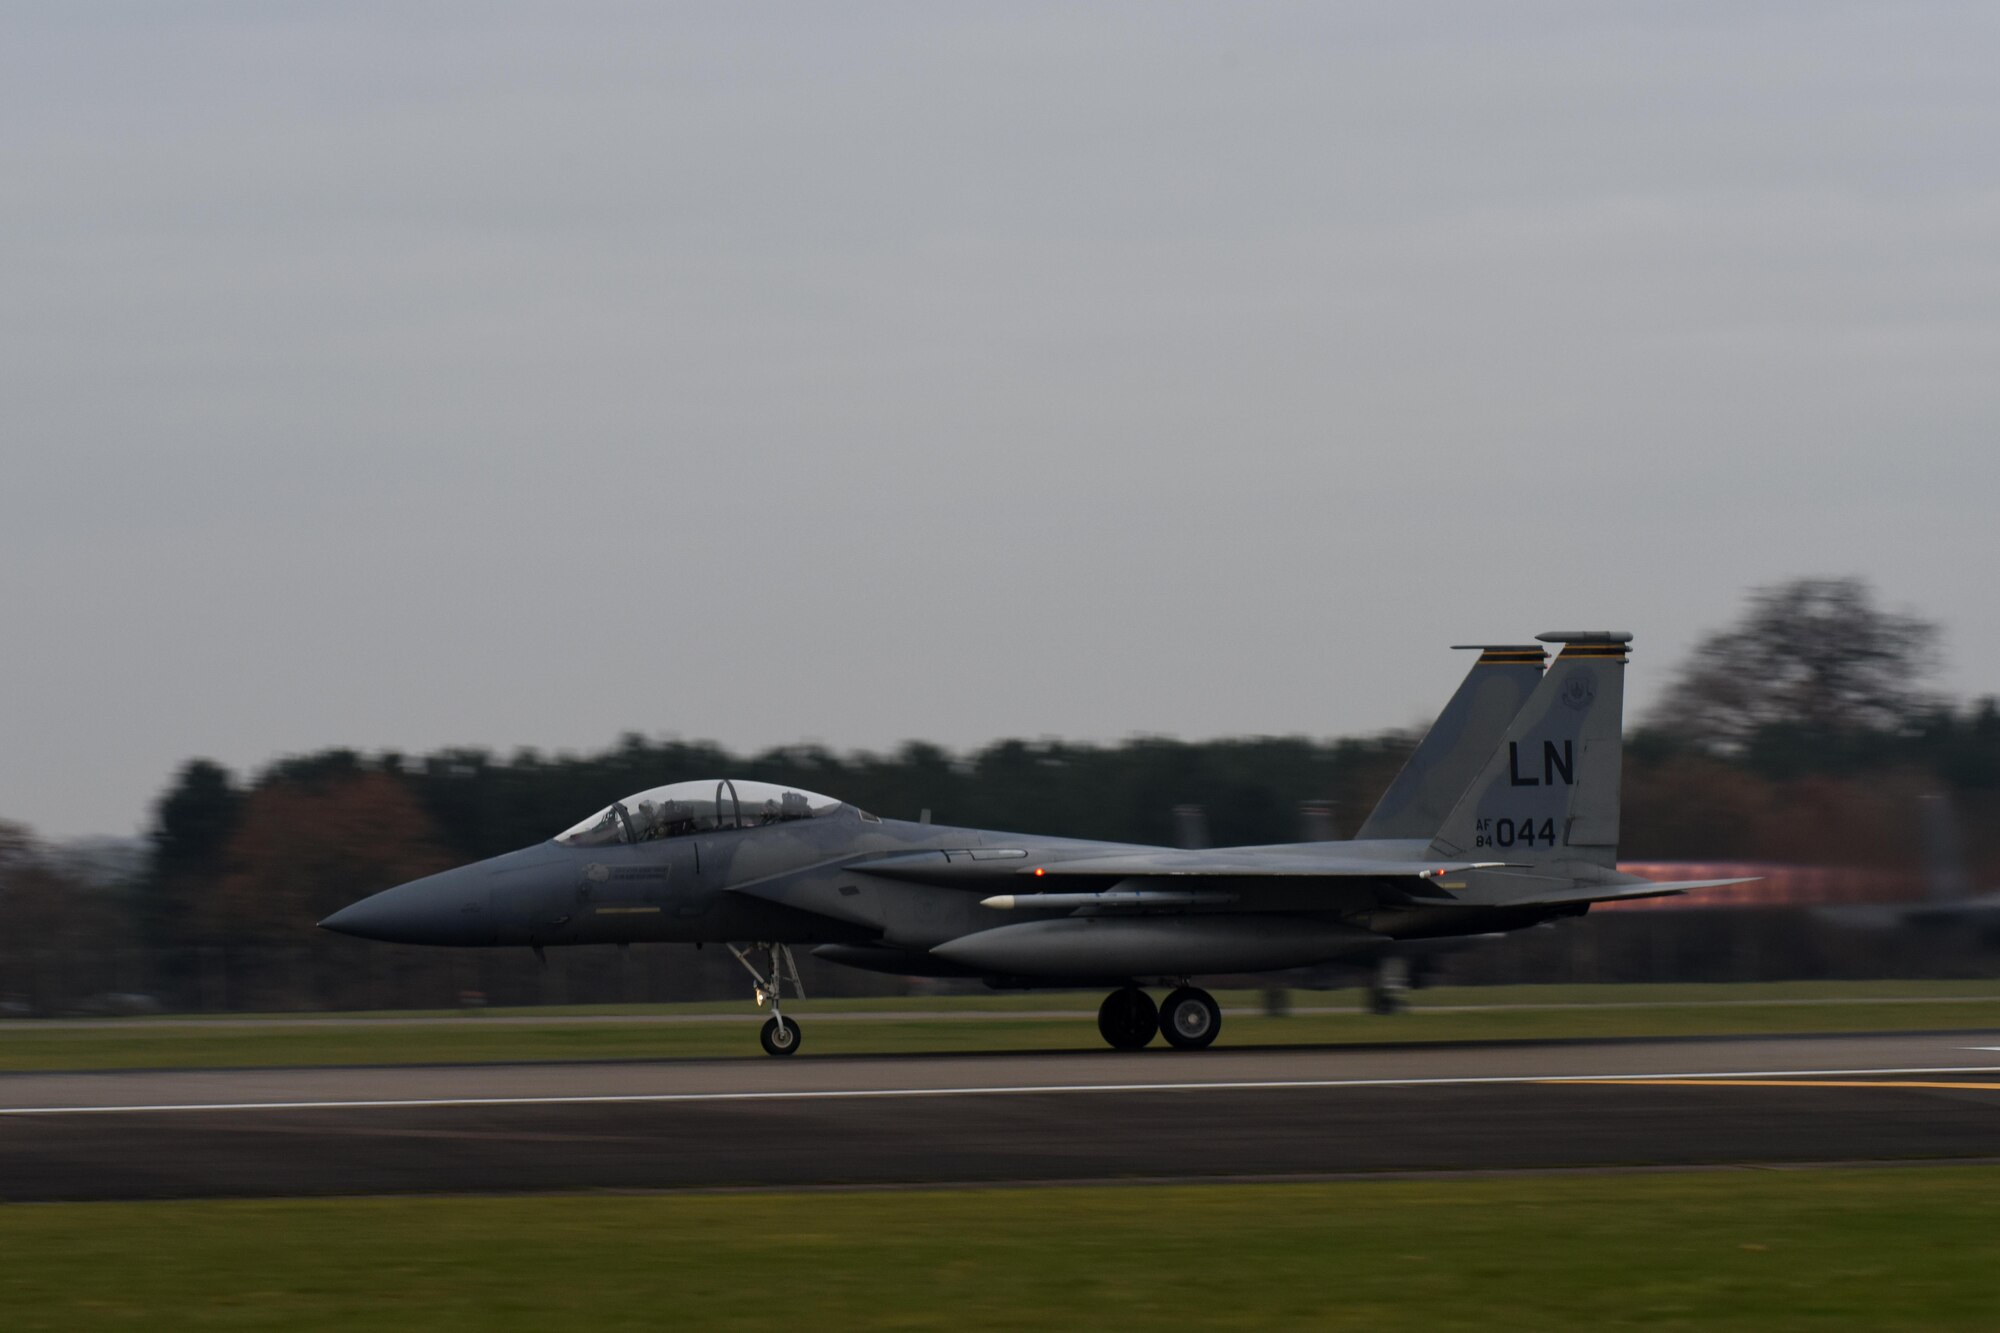 An F-15D Eagle assigned to the 493rd Fighter Squadron takes off Dec. 2, 2016, from RAF Lakenheath, England. The jet carried U.S. Air Force Col. Thomas Torkelson, 100th Air Refueling Wing commander, on a familiarization flight in an F-15. (U.S. Air Force photo/Airman 1st Class Eli Chevalier)